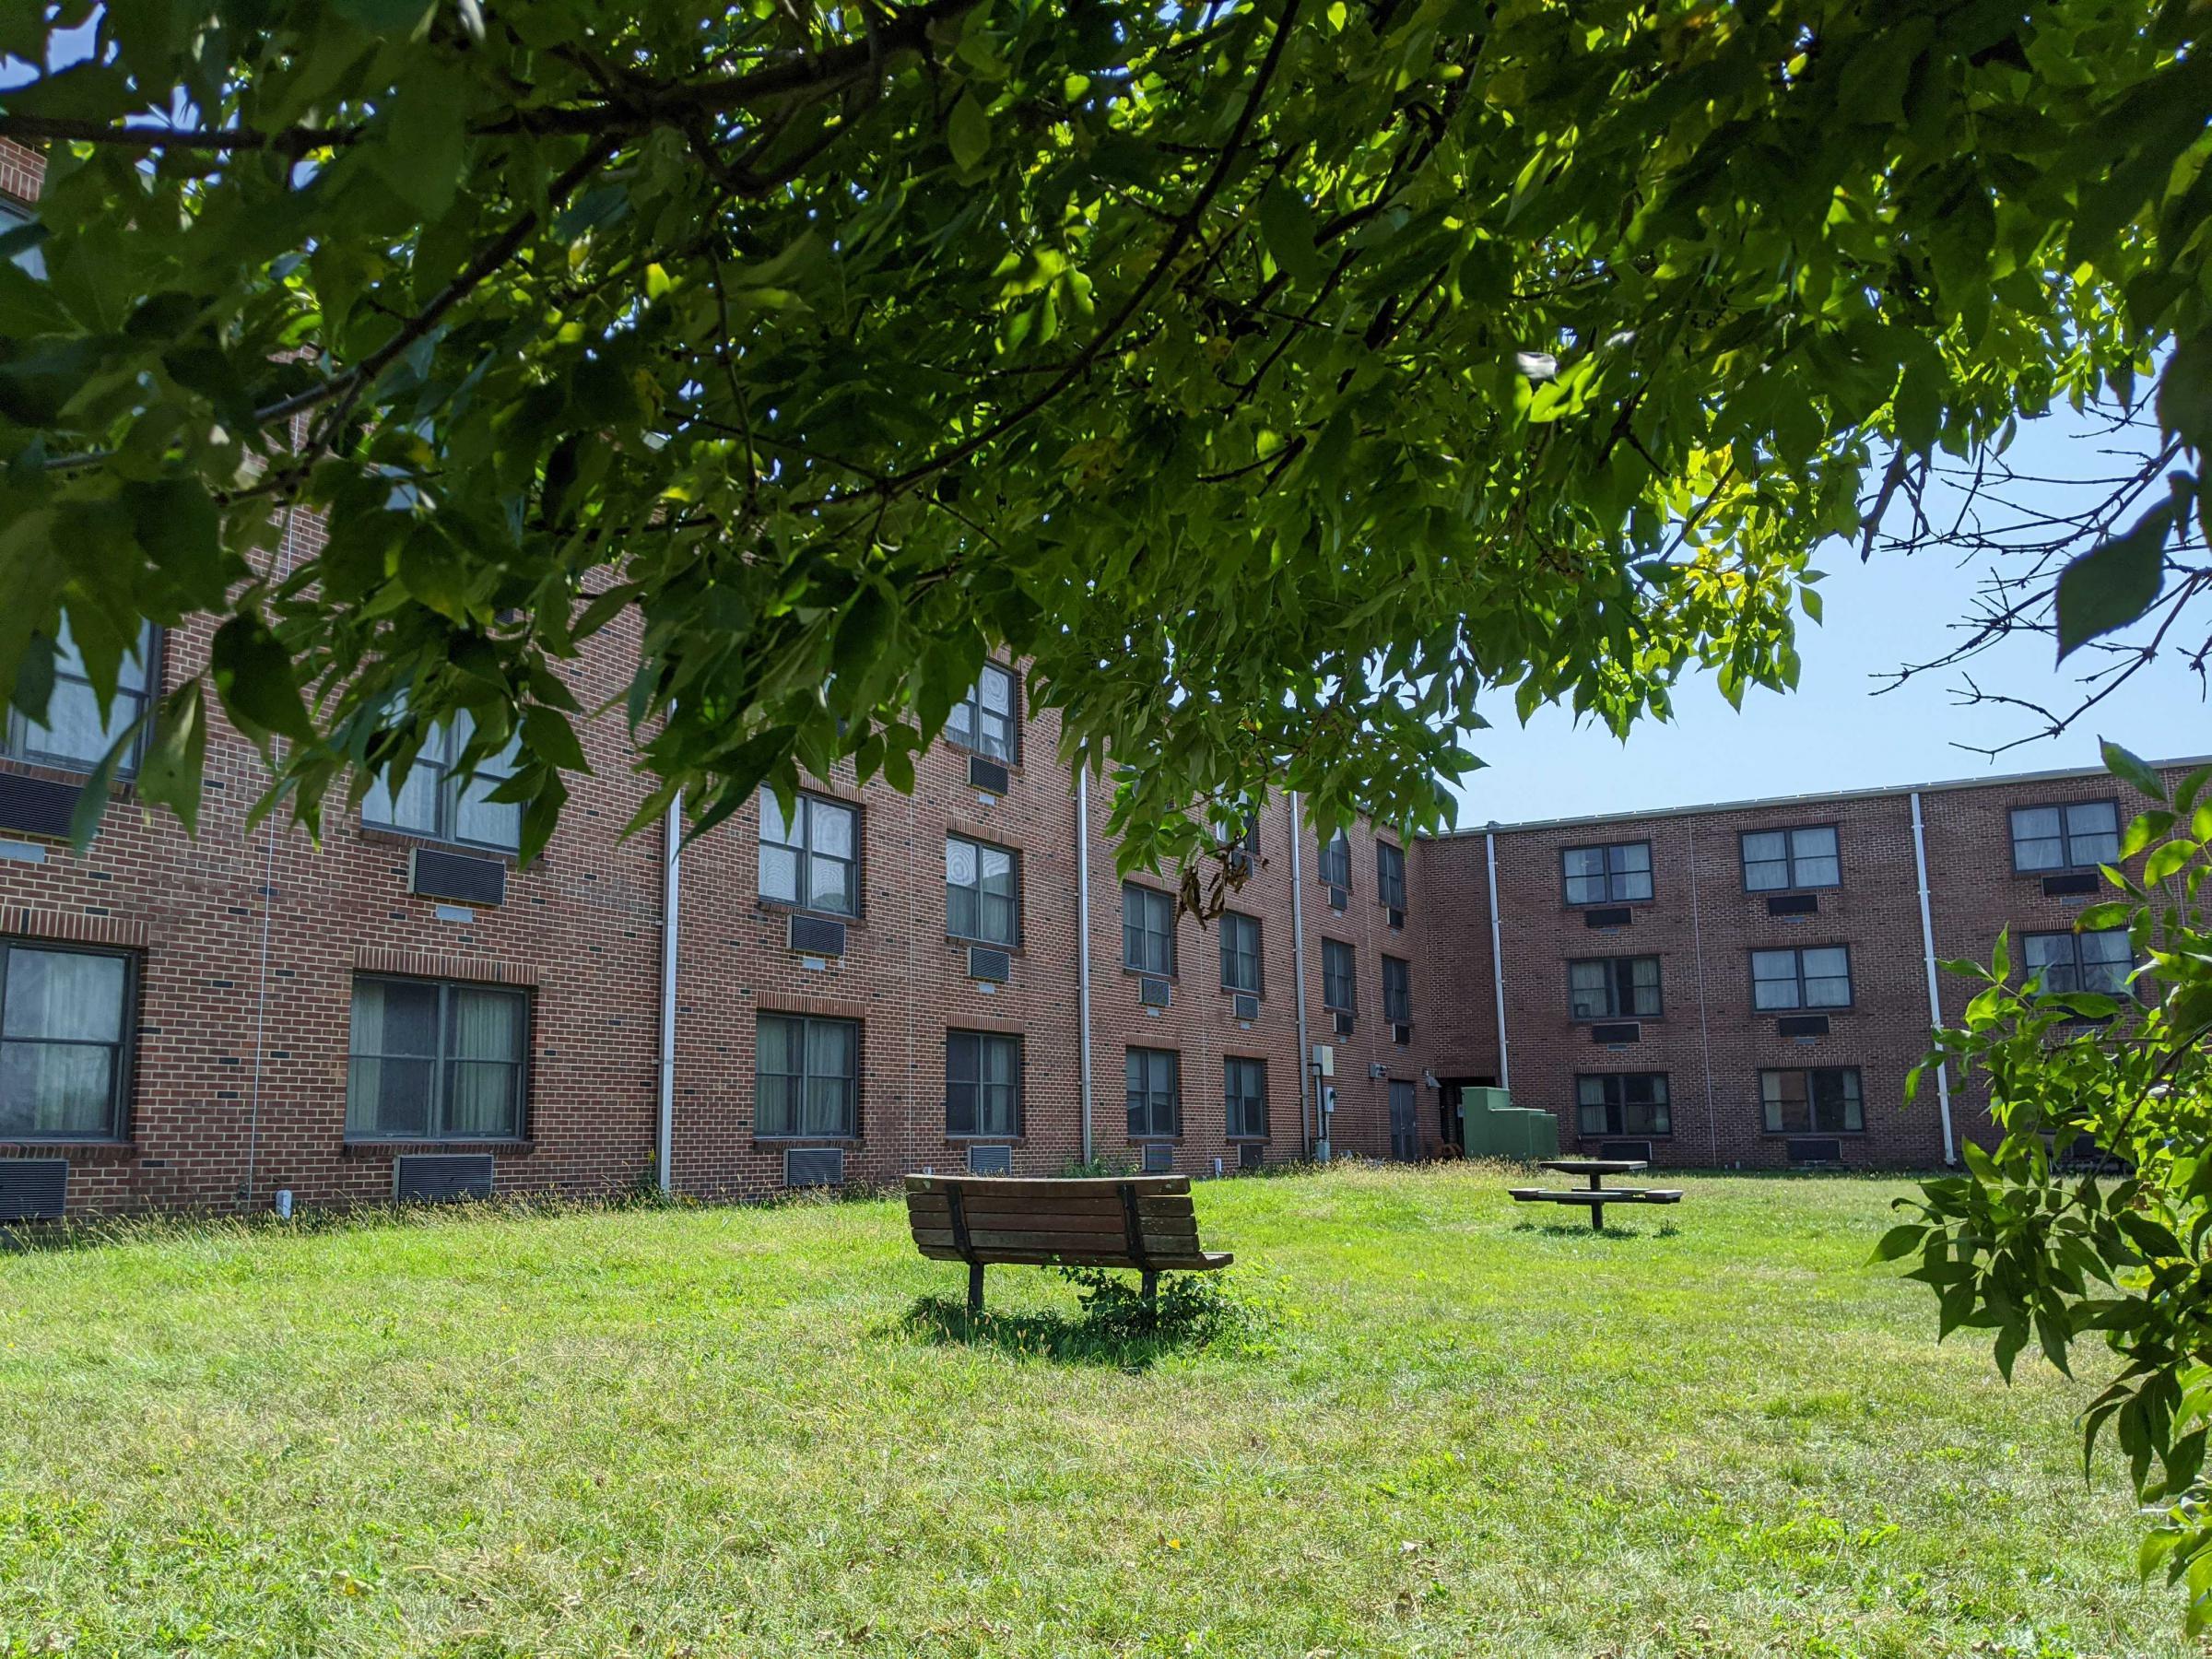 A grassy area surrounded by a two story brick building with uniform windows and air conditioners.